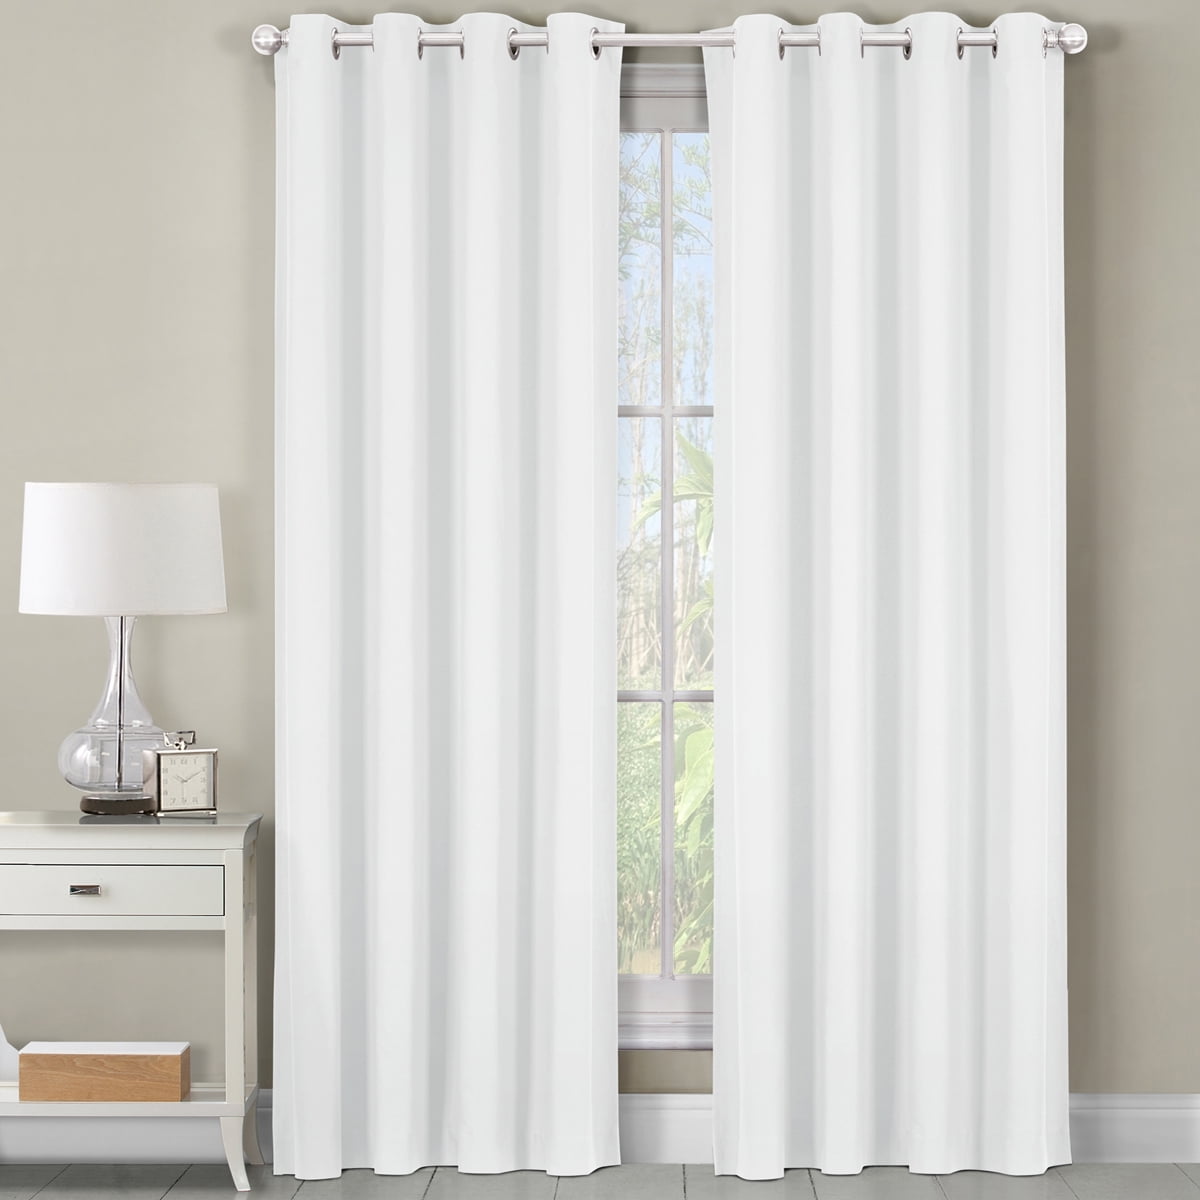 Luxor Heavyweight 100 Cotton Solid RoomDarkening Curtains with Grommets, Single Panel (54x96